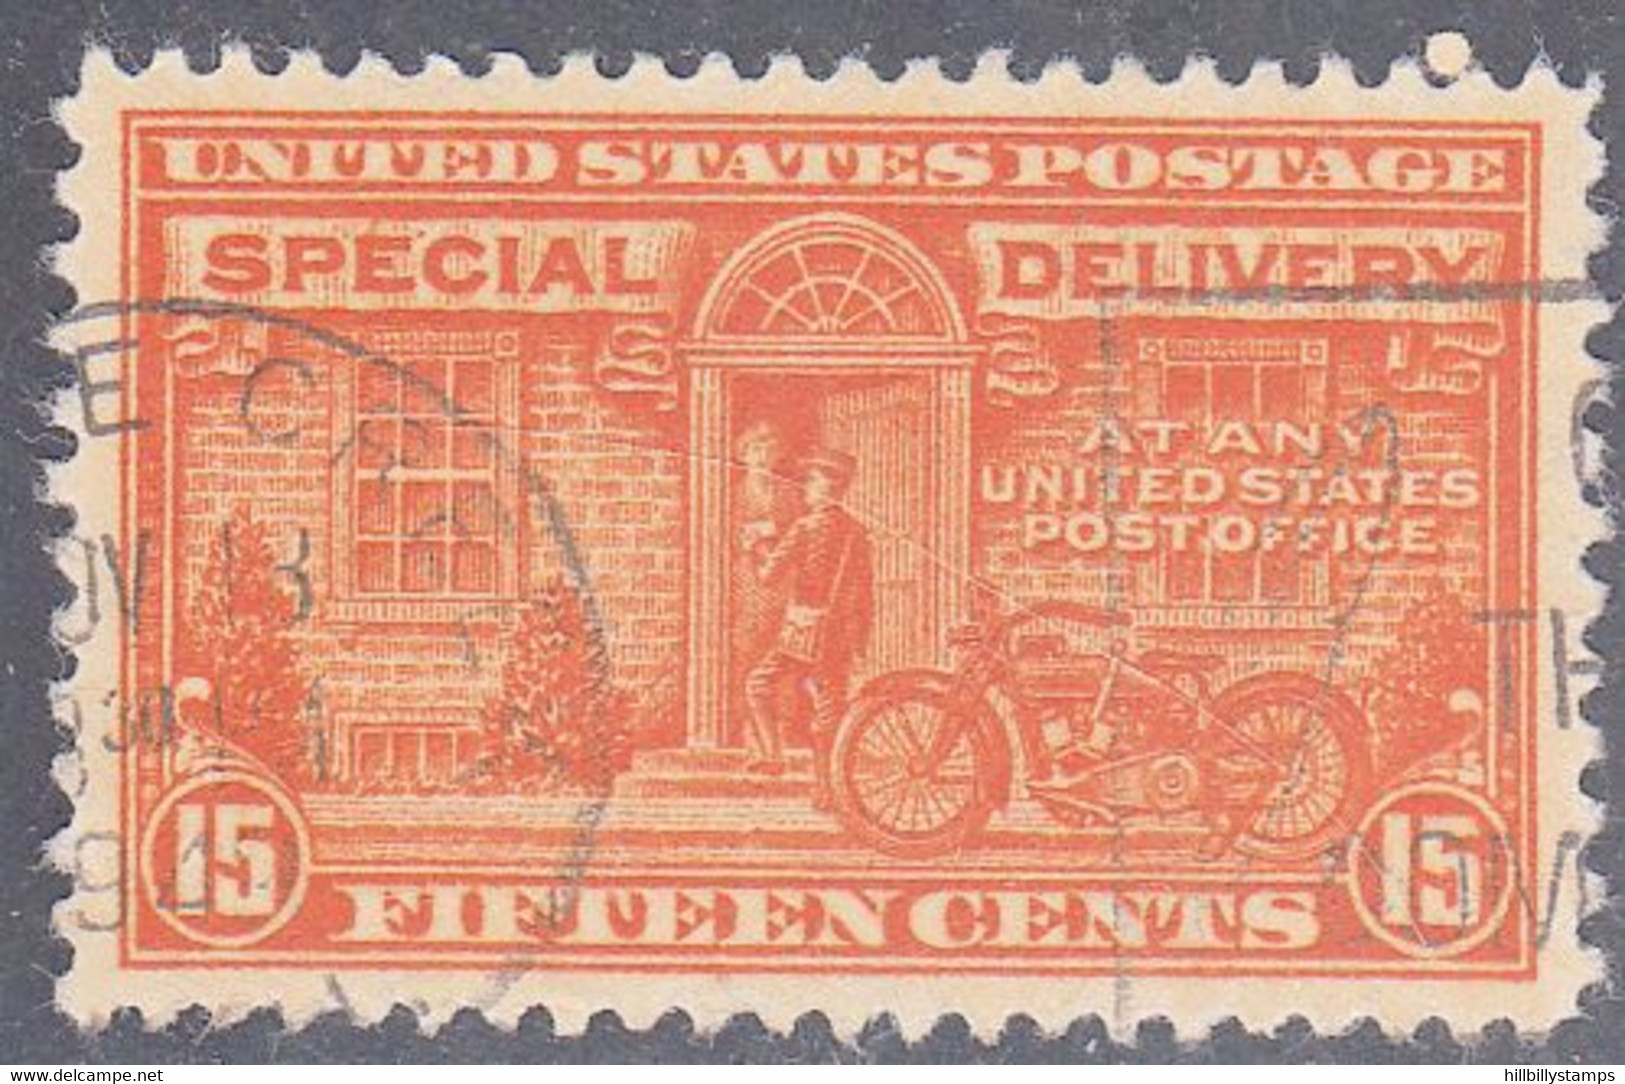 UNITED STATES     SCOTT NO  E16   USED    YEAR  1927  PERF  11X 10.5 - Special Delivery, Registration & Certified